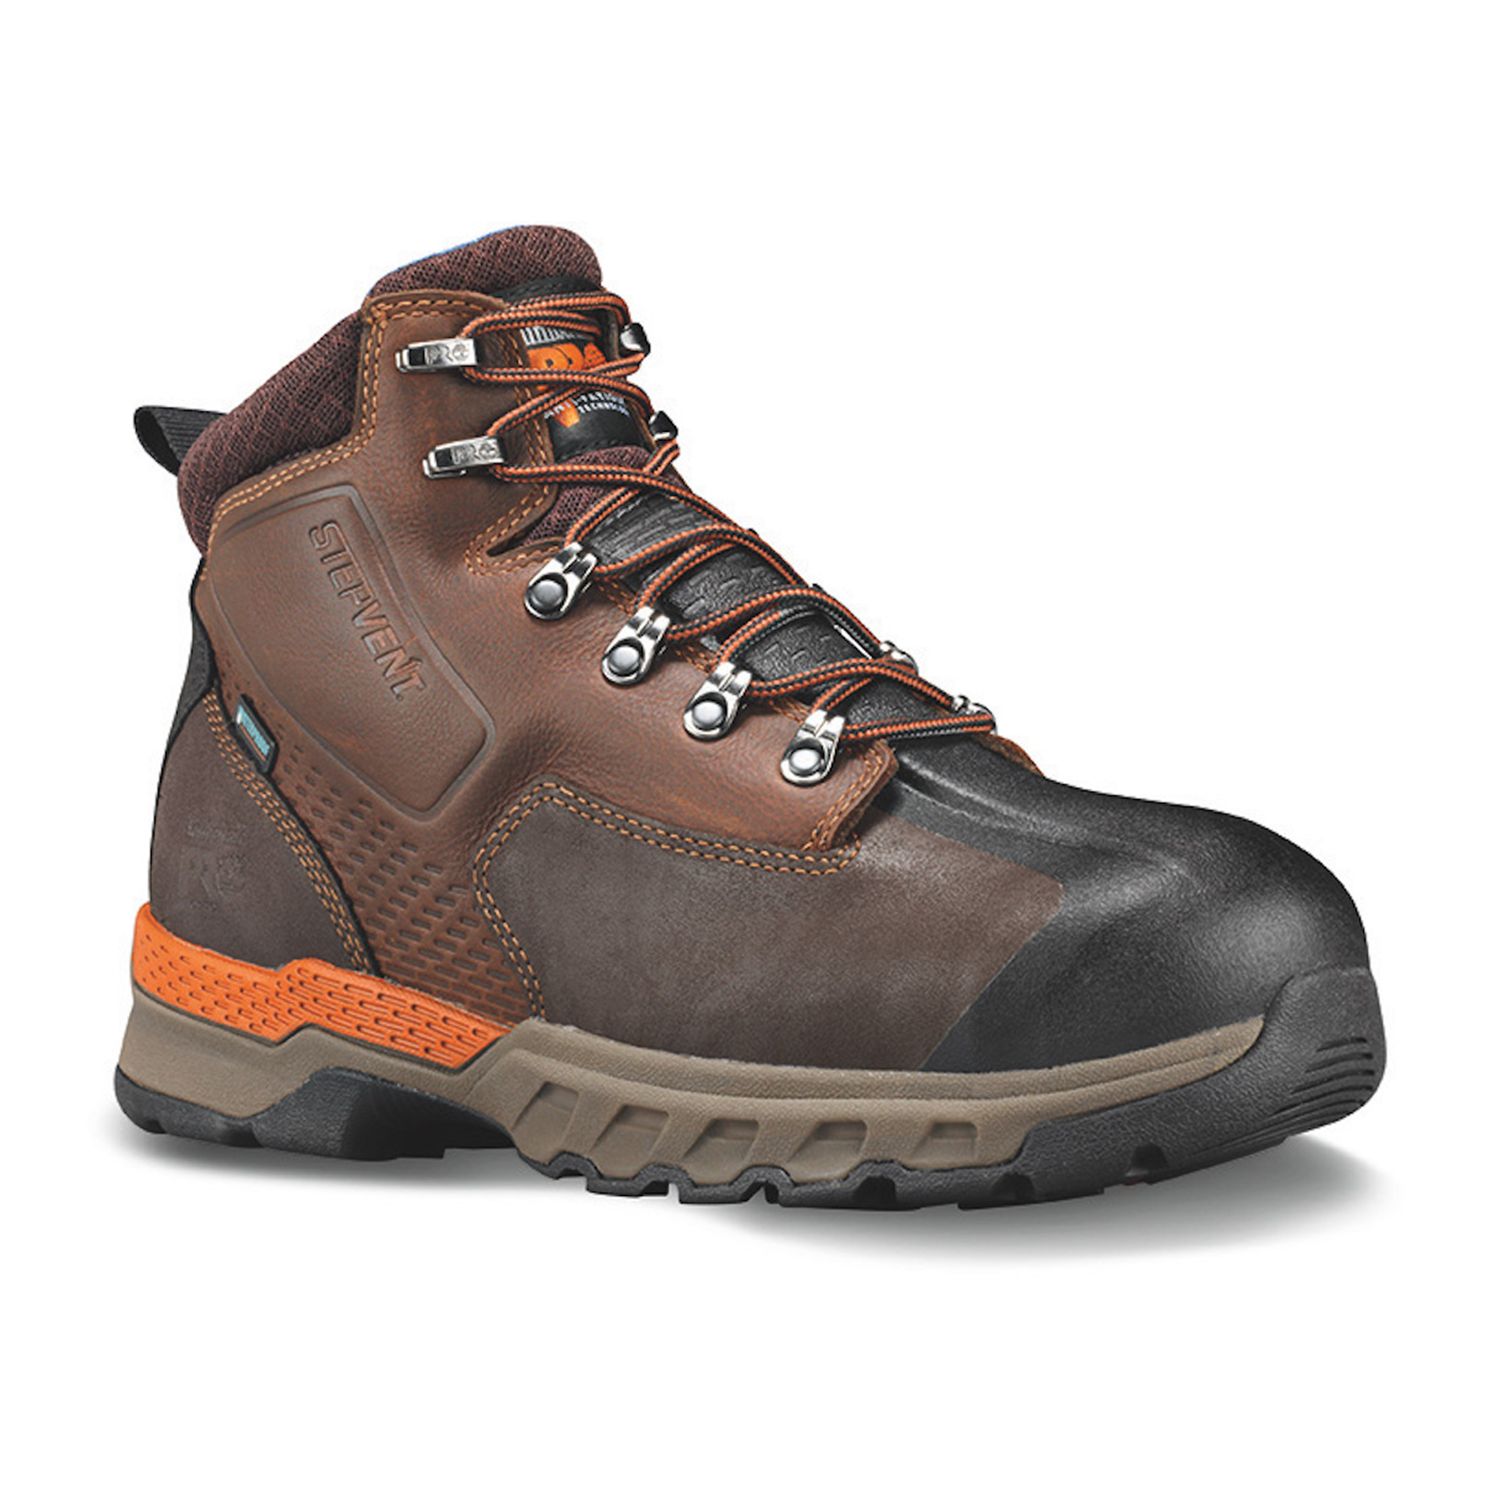 timberland work boots on sale